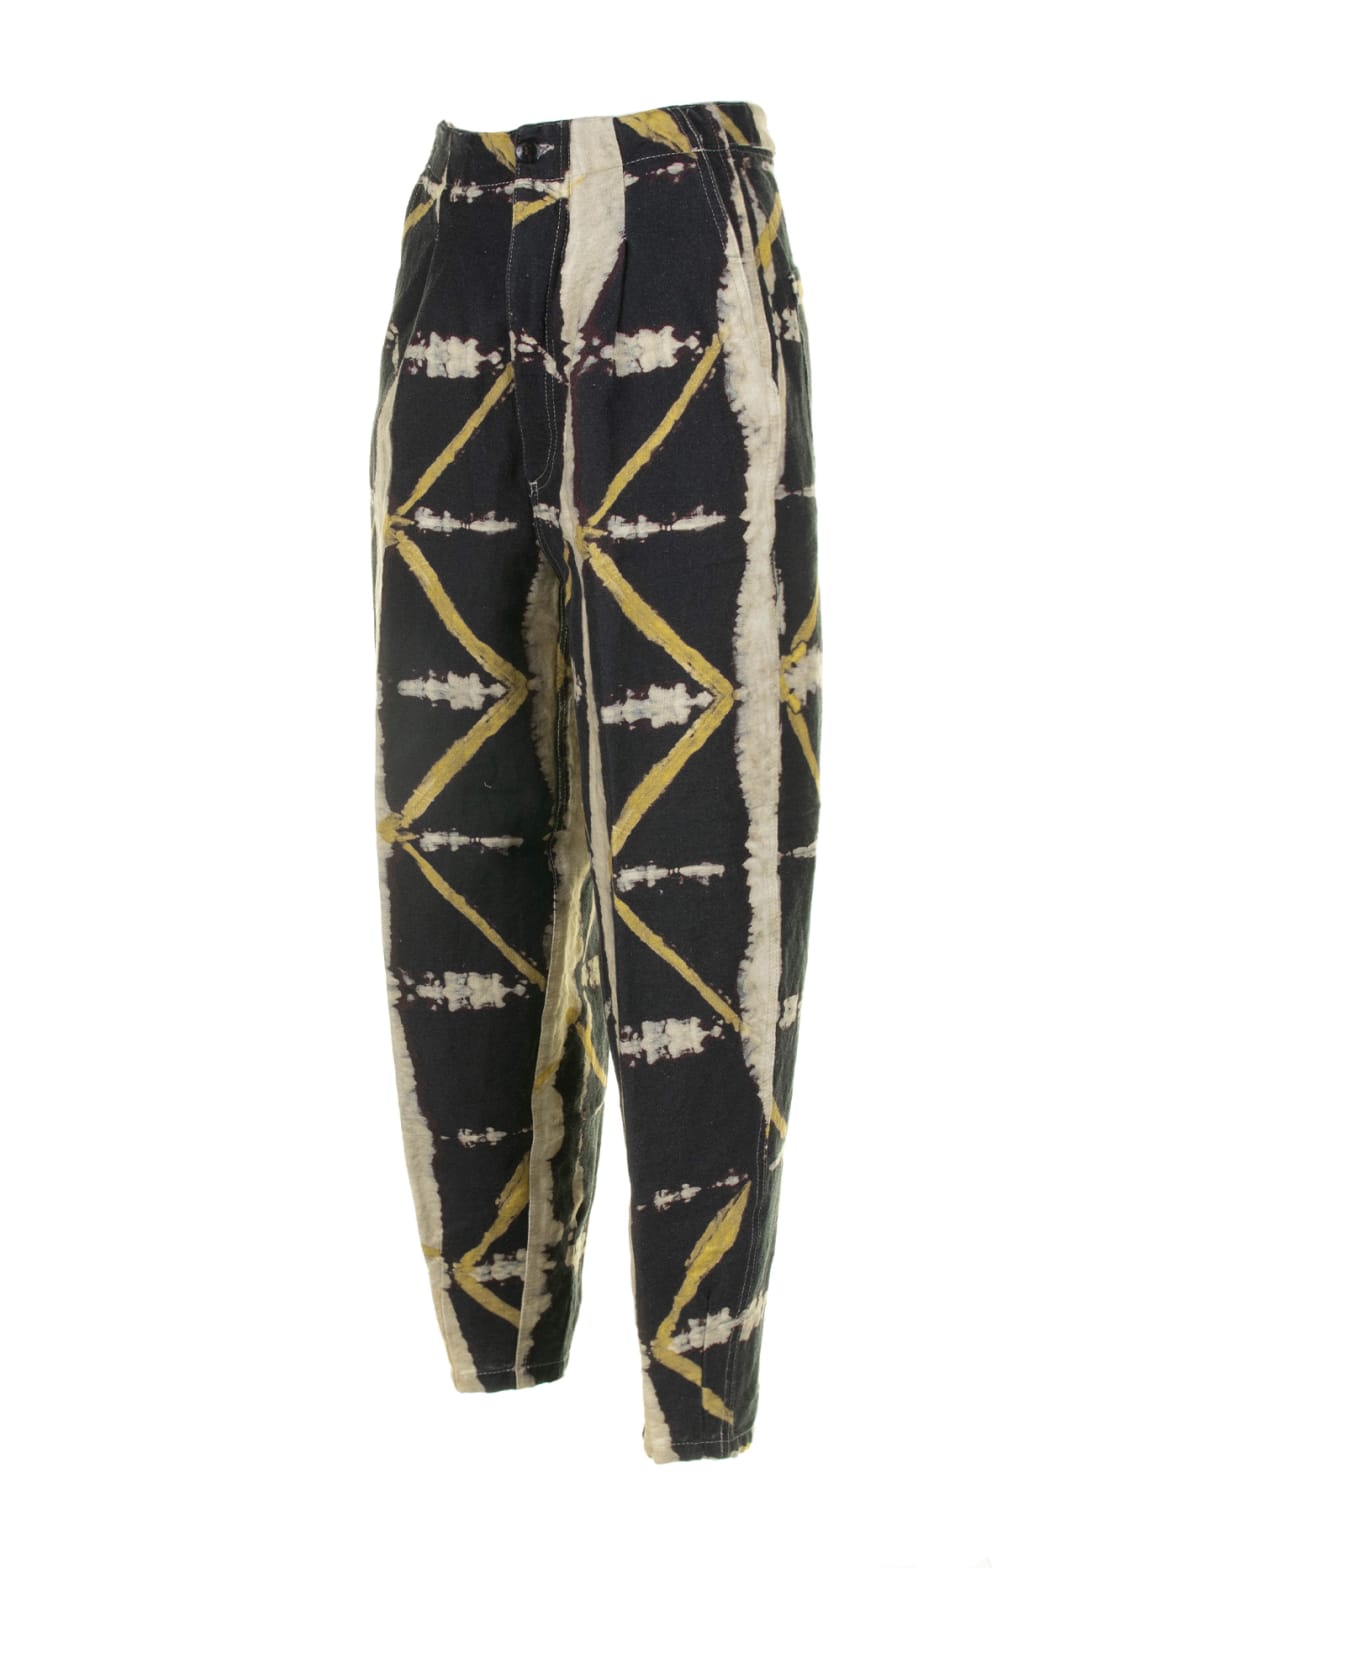 Myths High-waisted Patterned Trousers